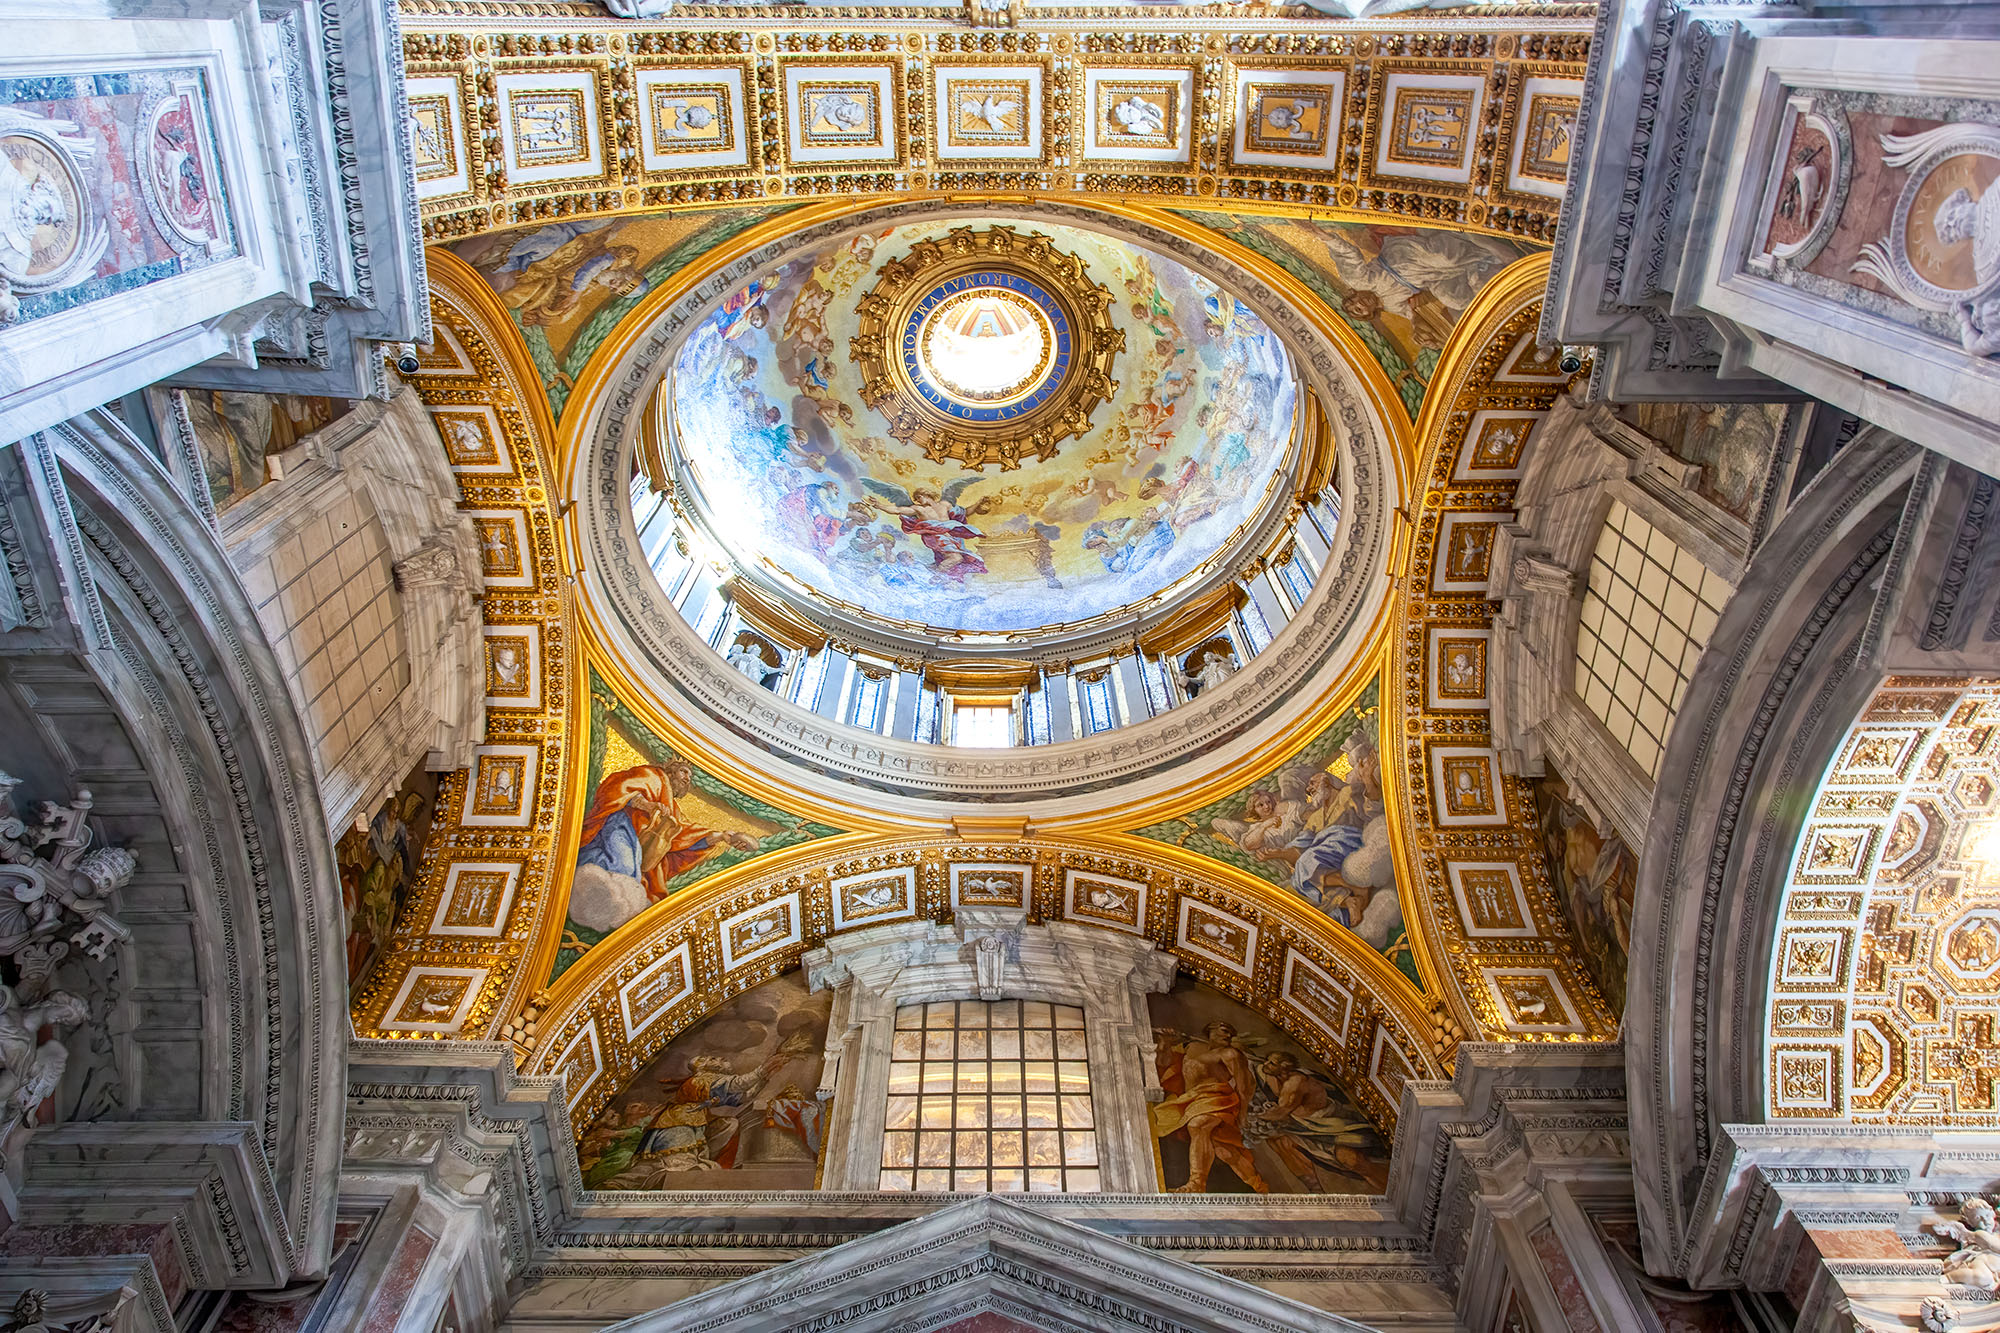 Gazing upwards at the oval dome of St. Peter's Basilica in the Vatican, I am immersed in a world of impeccable symmetry. The...